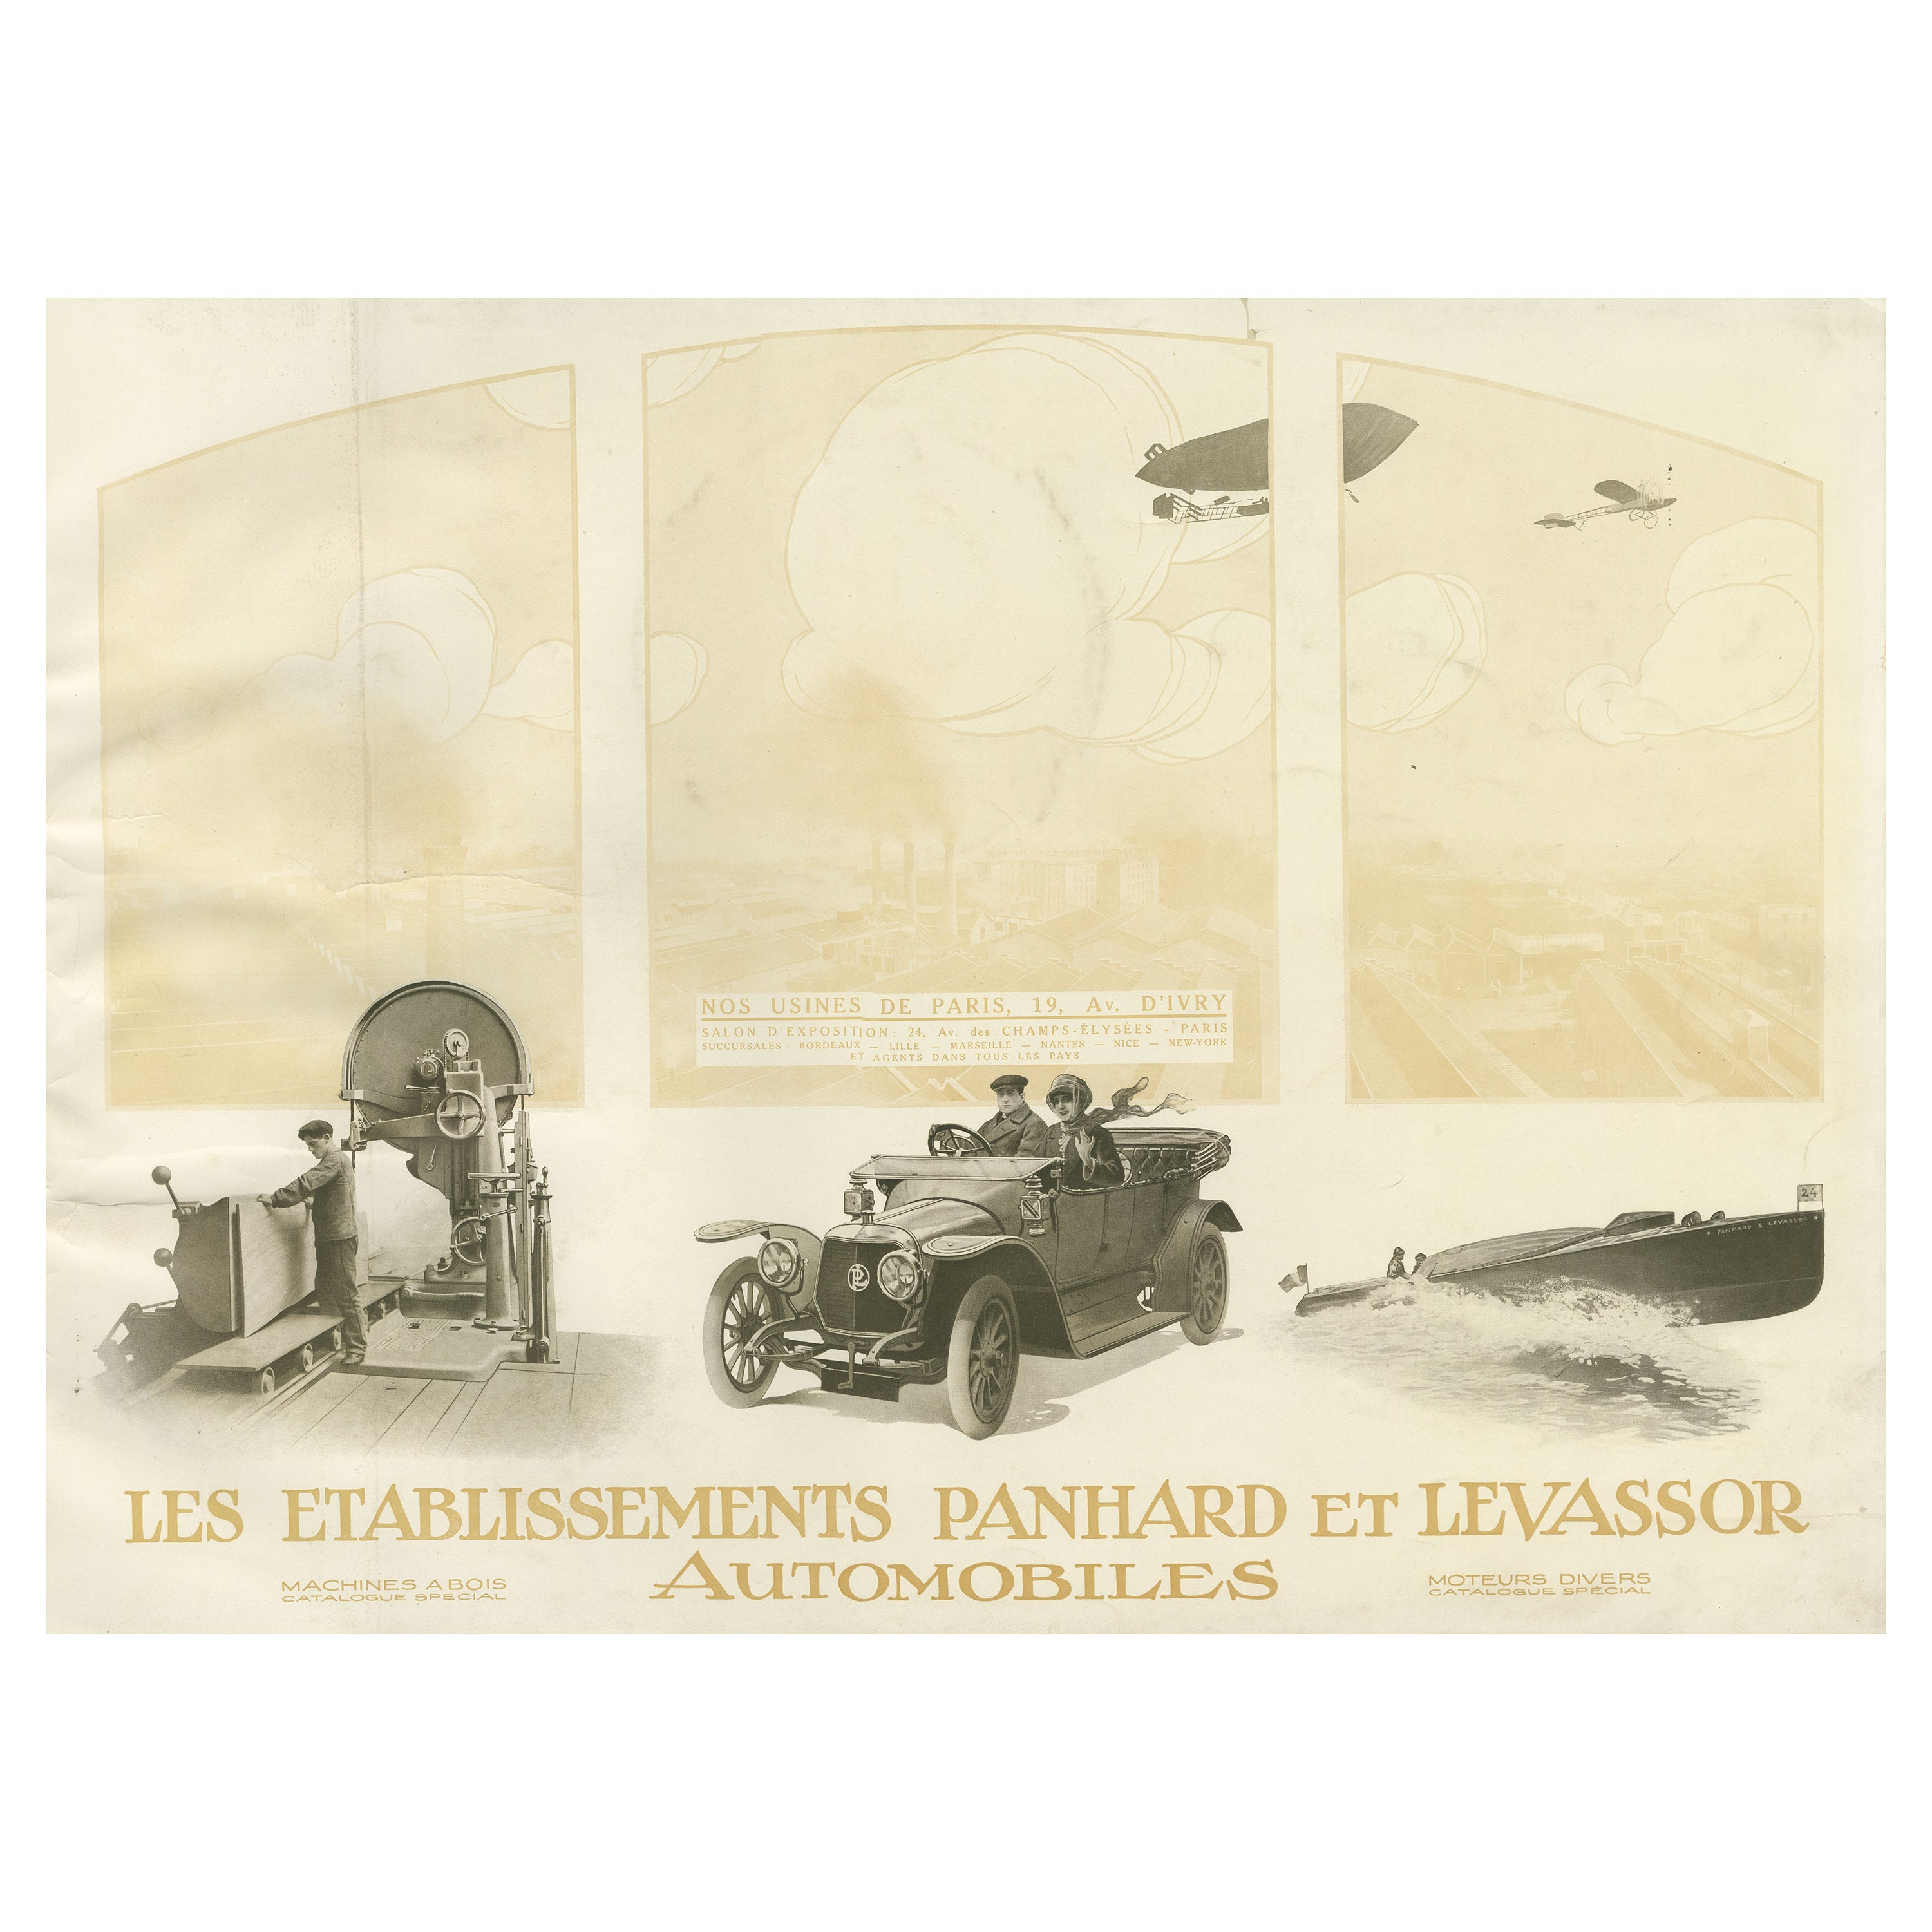 Antique Title Page with Illustrations of a Panhard et Levassor Car Catalog For Sale